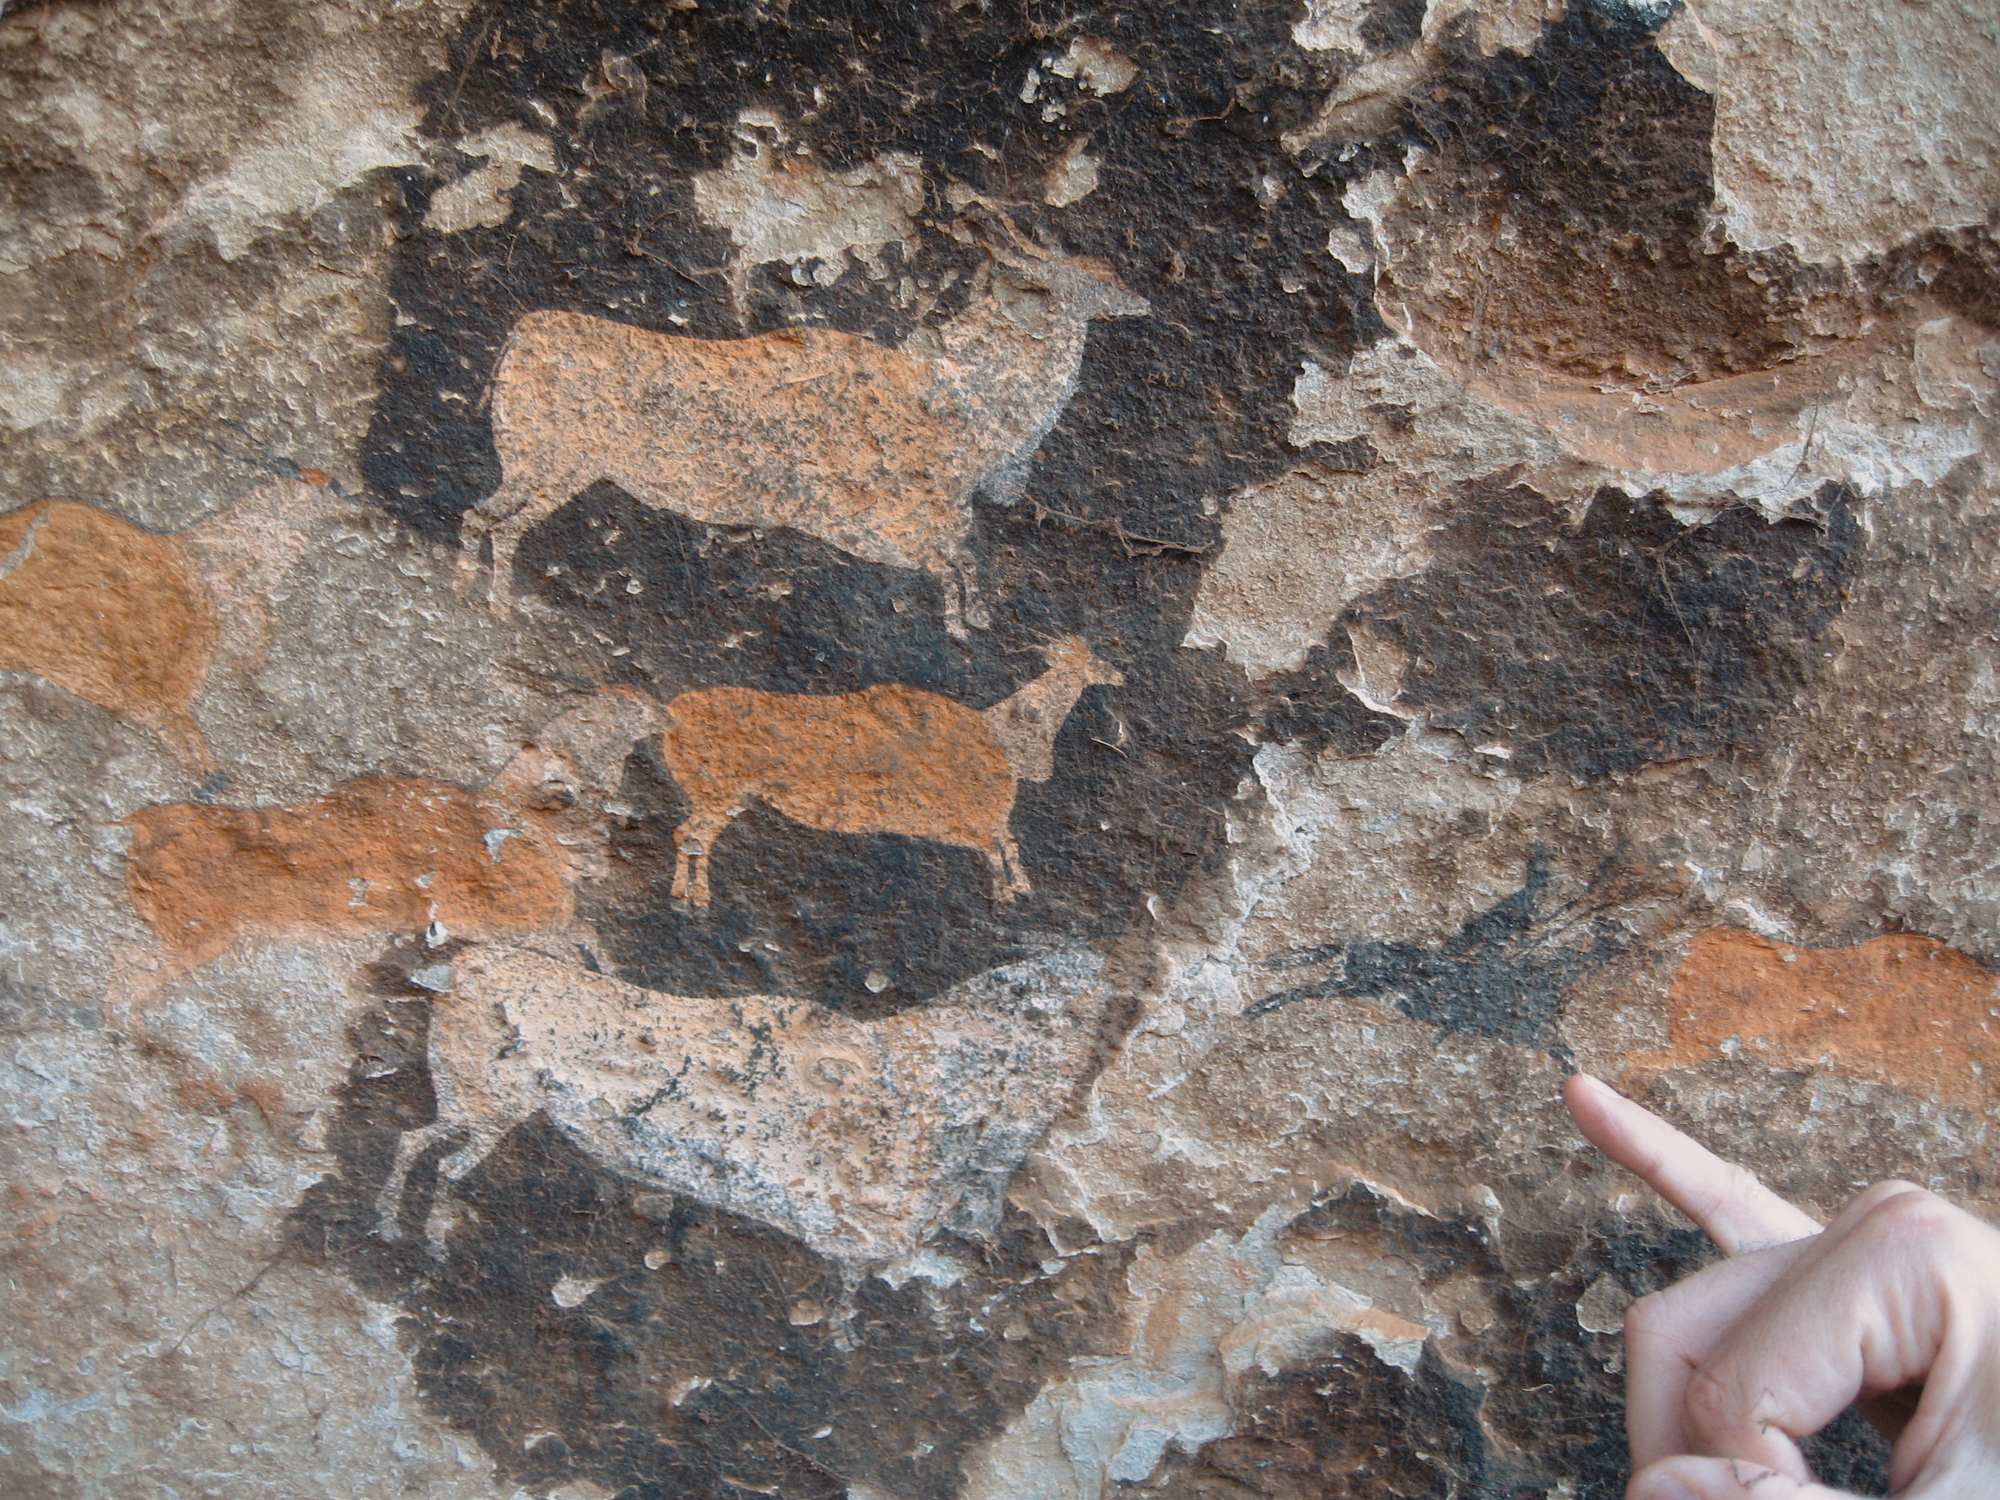 Examining San rock art<br>in South Africa